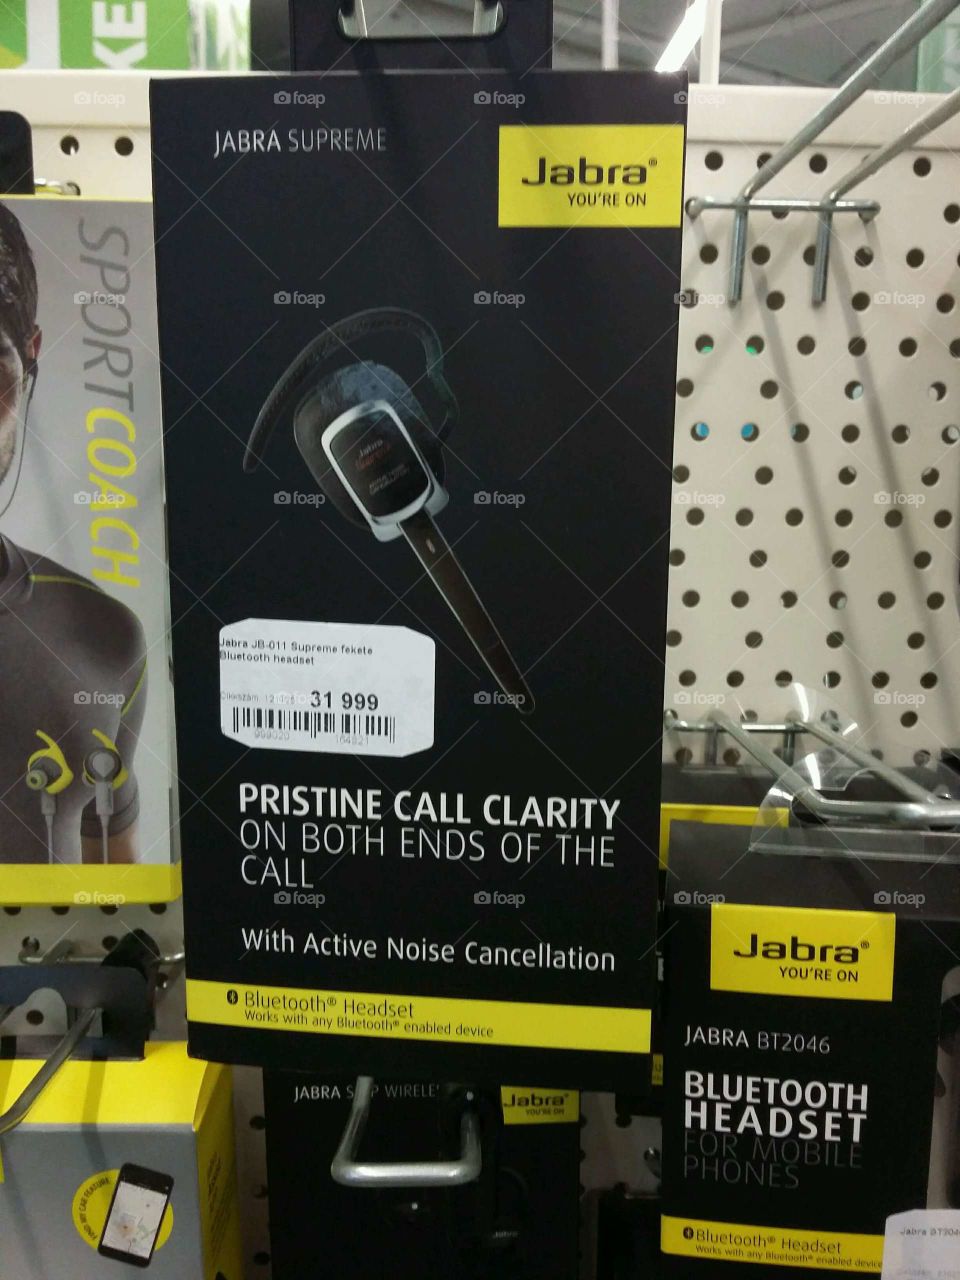 Bluetooth headset in the store